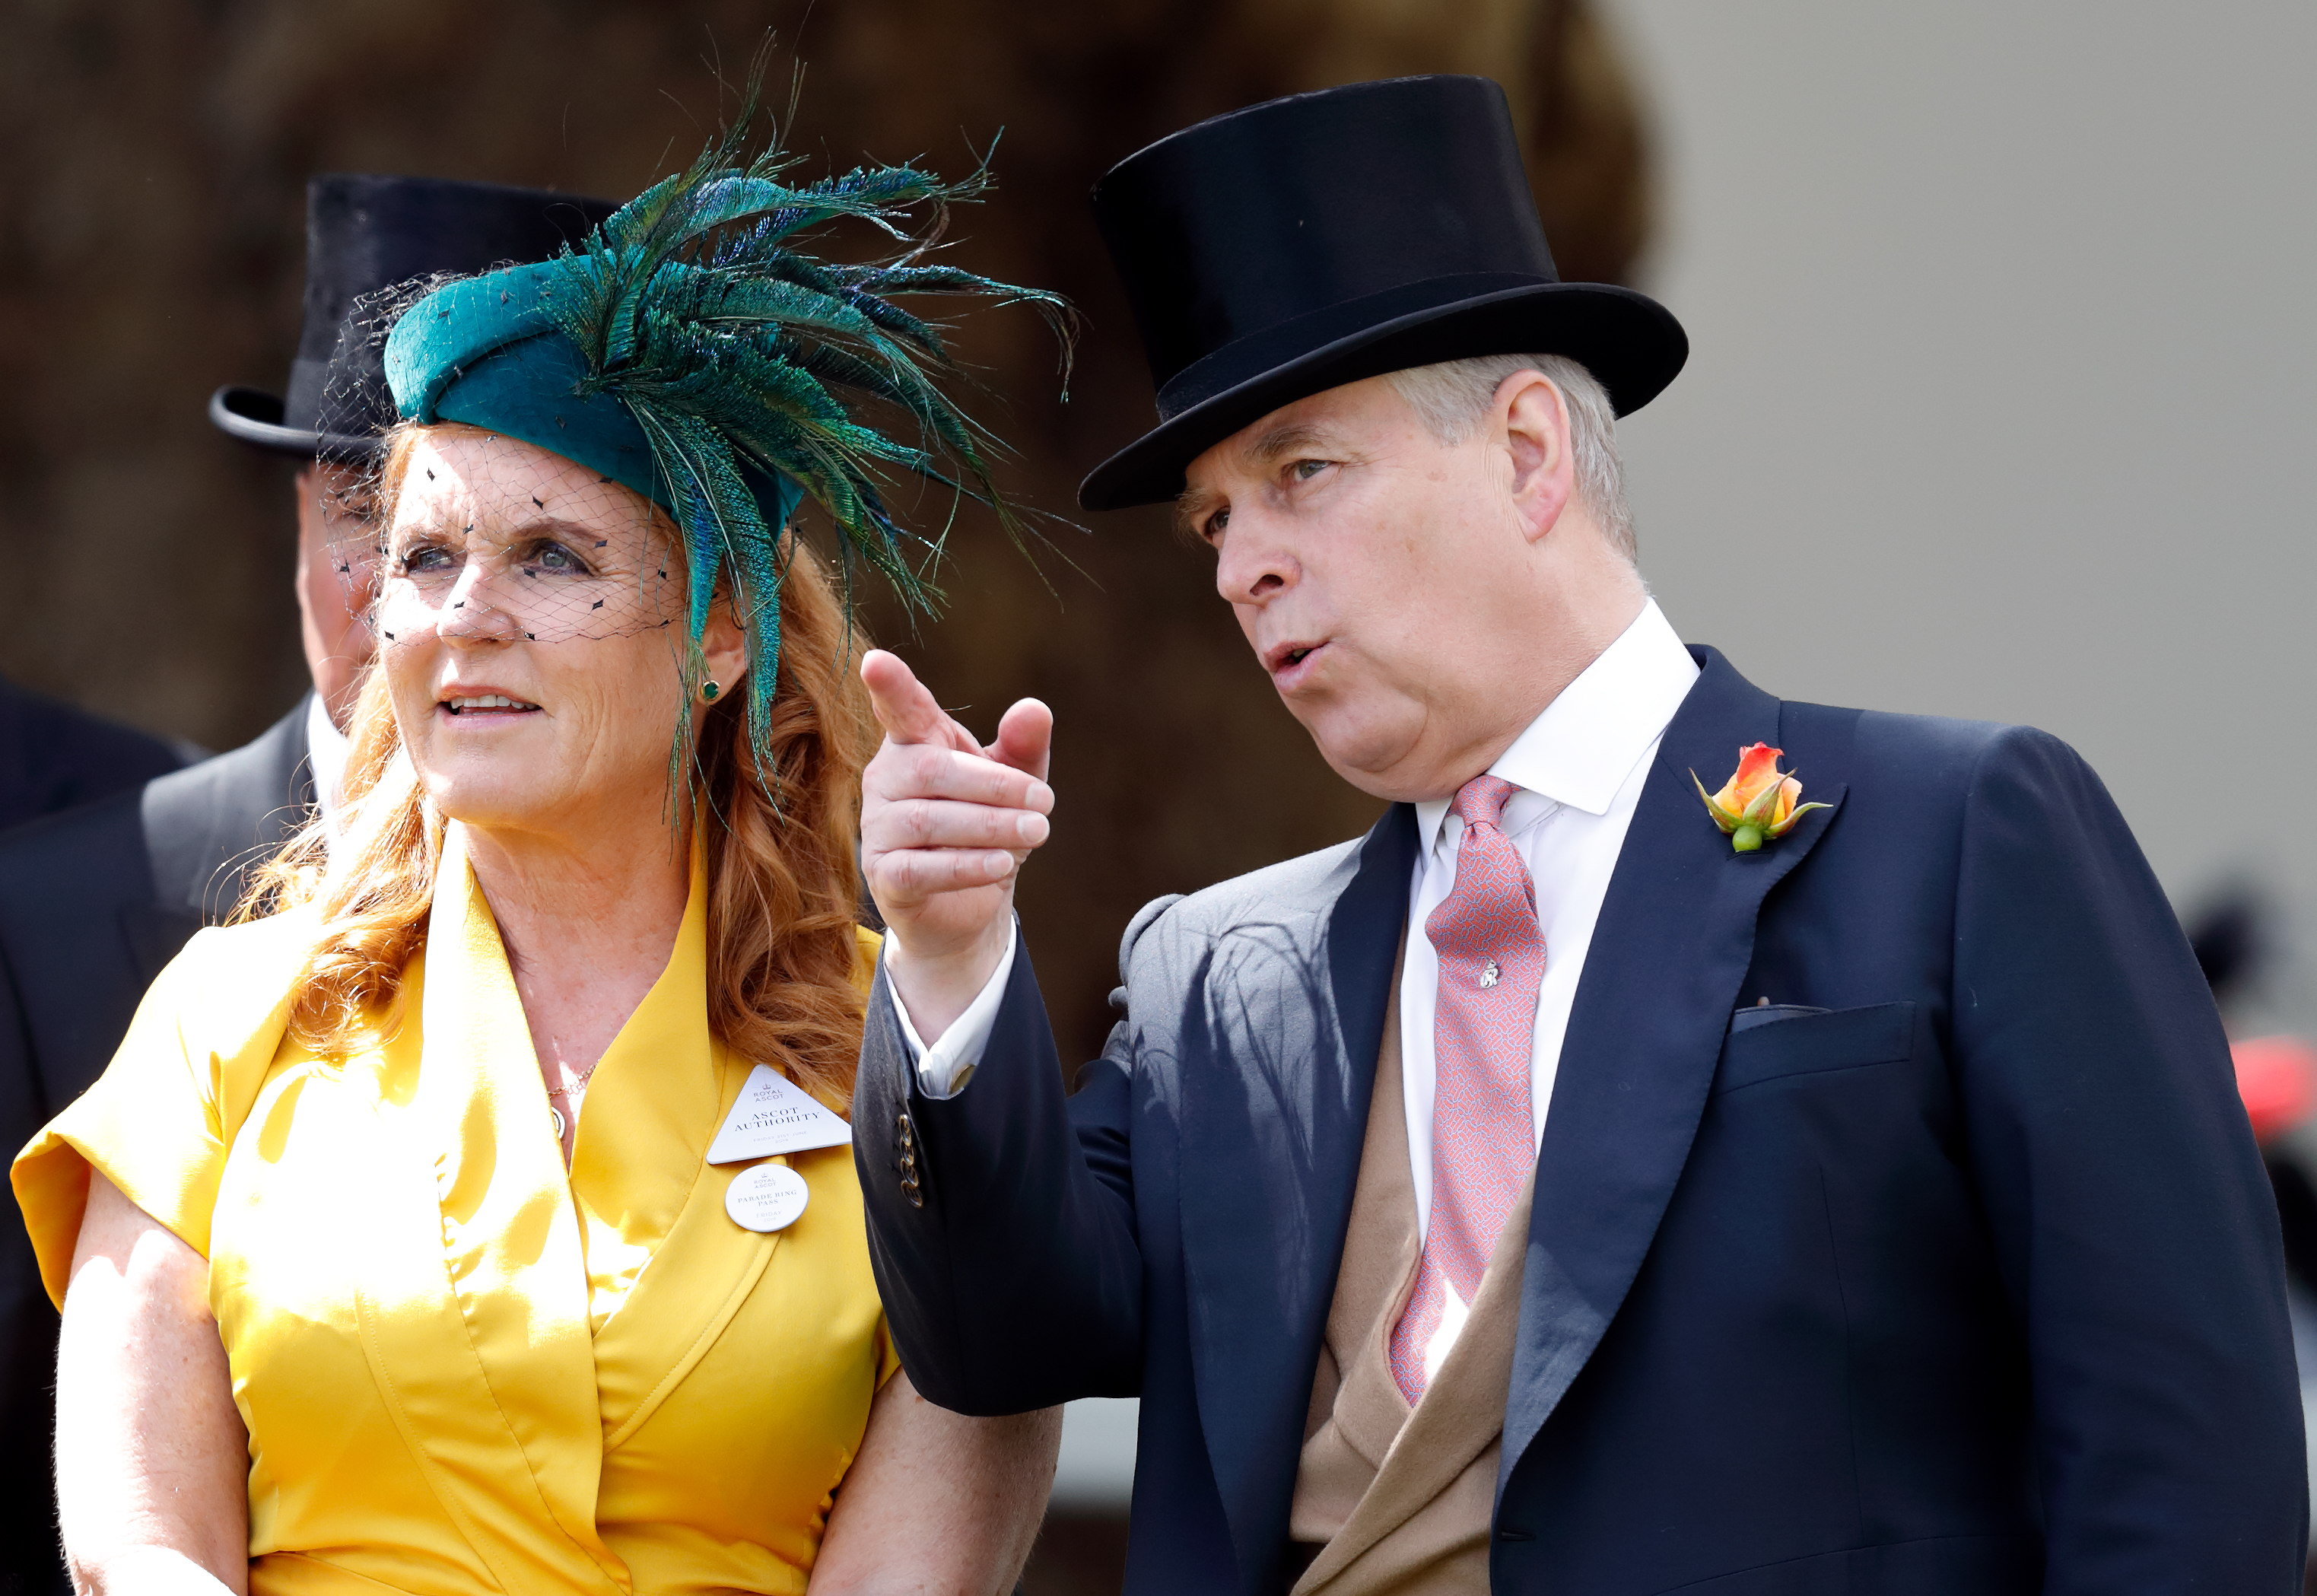 Sarah Ferguson, Duchess of York, and Prince Andrew, Duke of York at day four of Royal Ascot at Ascot Racecourse on June 21, 2019, in Ascot, England | Source: Getty Images